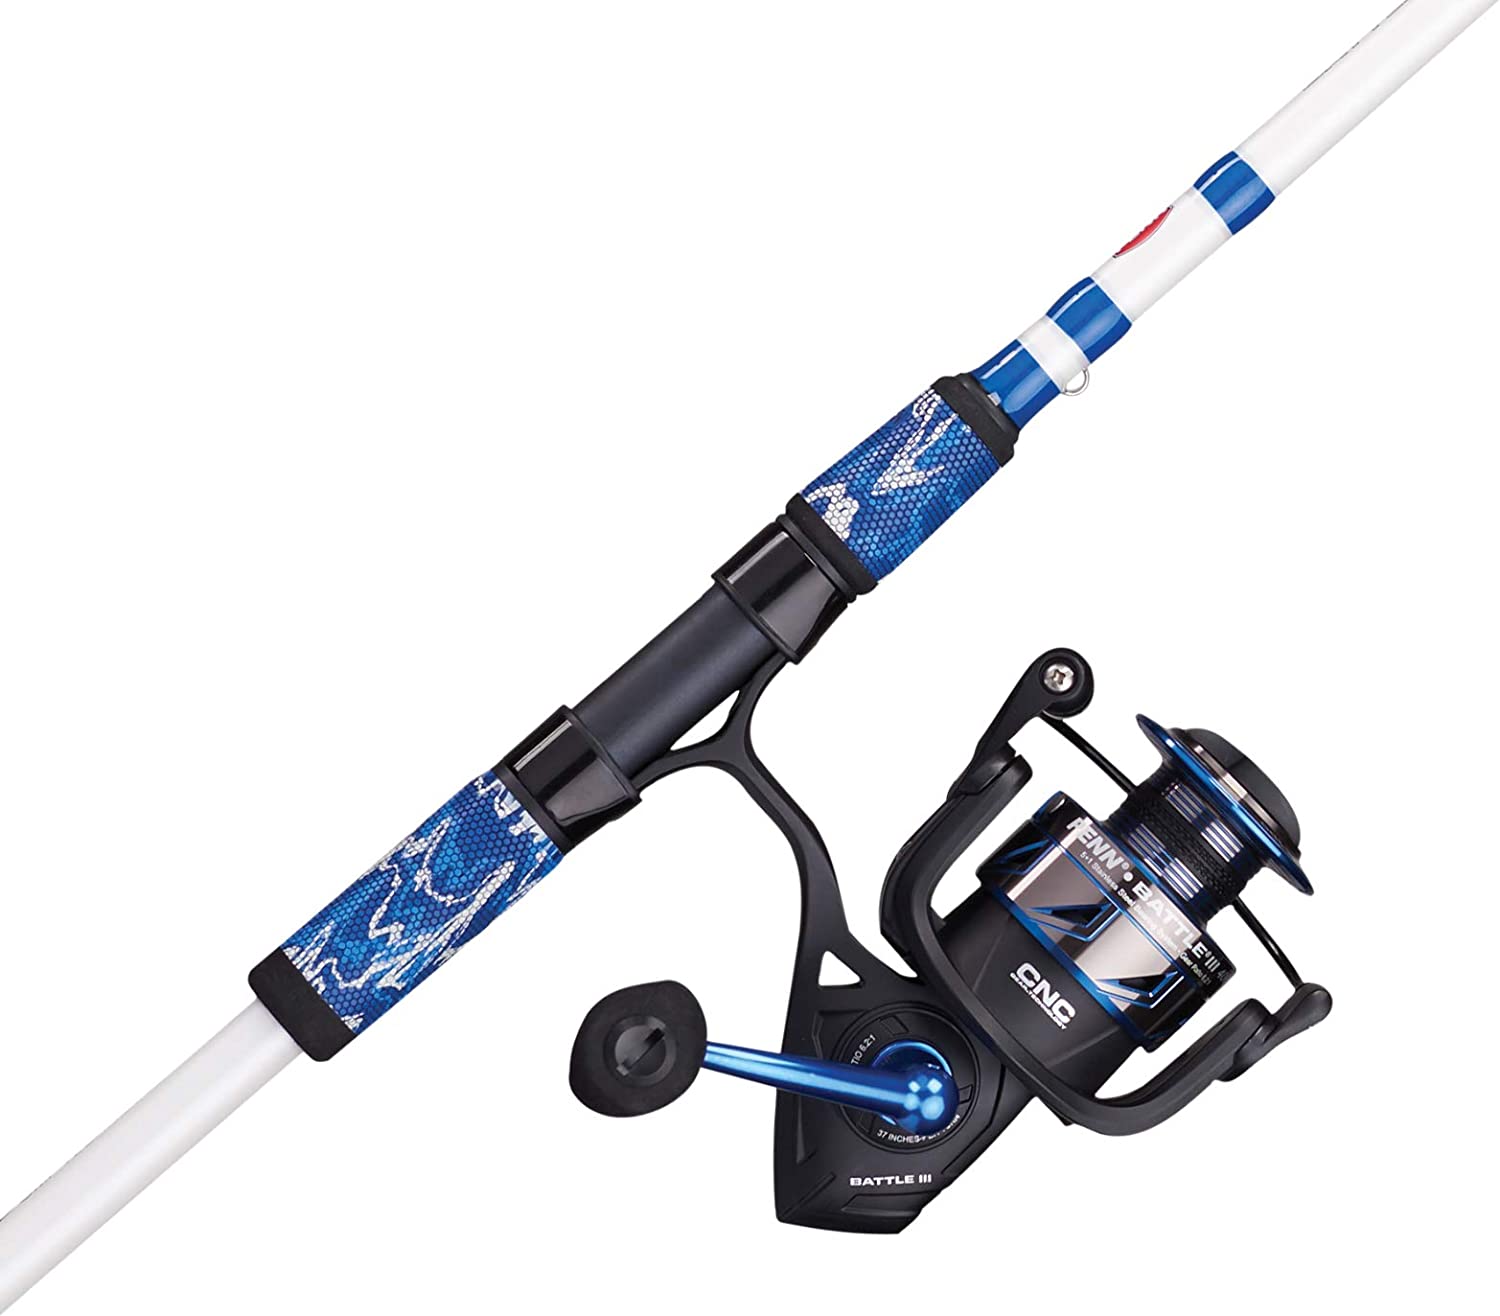 Penn Battle III Spinning Reel ( 5000 ) and Fishing Rod (8', 2 pieces) Combo - $129.95